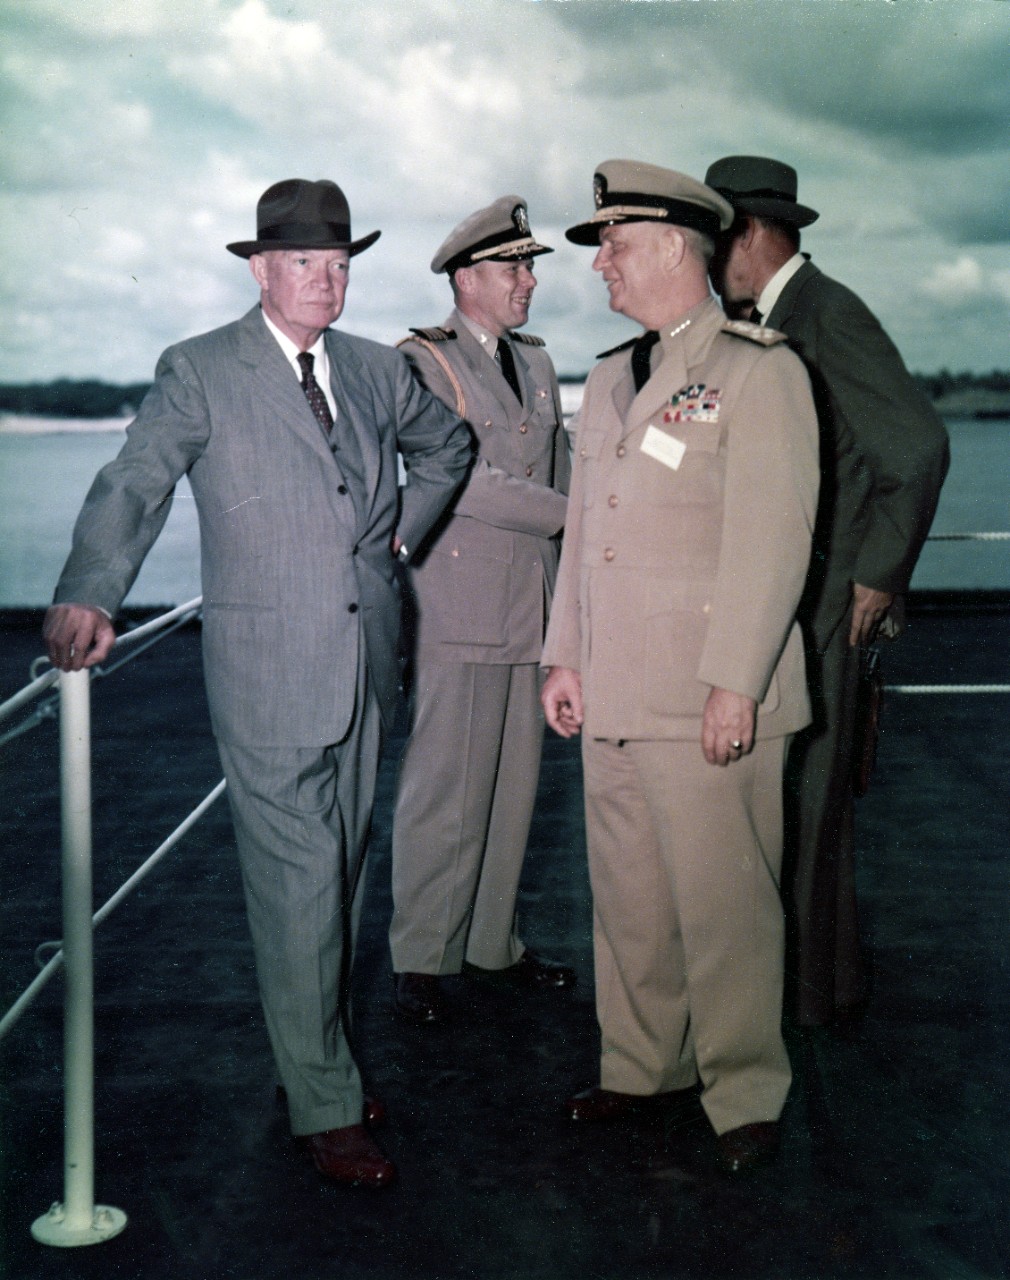 Photo #: 80-G-K-22608 (Color)  President Dwight D. Eisenhower (left), with Admiral Arleigh A. Burke, USN, Chief of Naval Operations